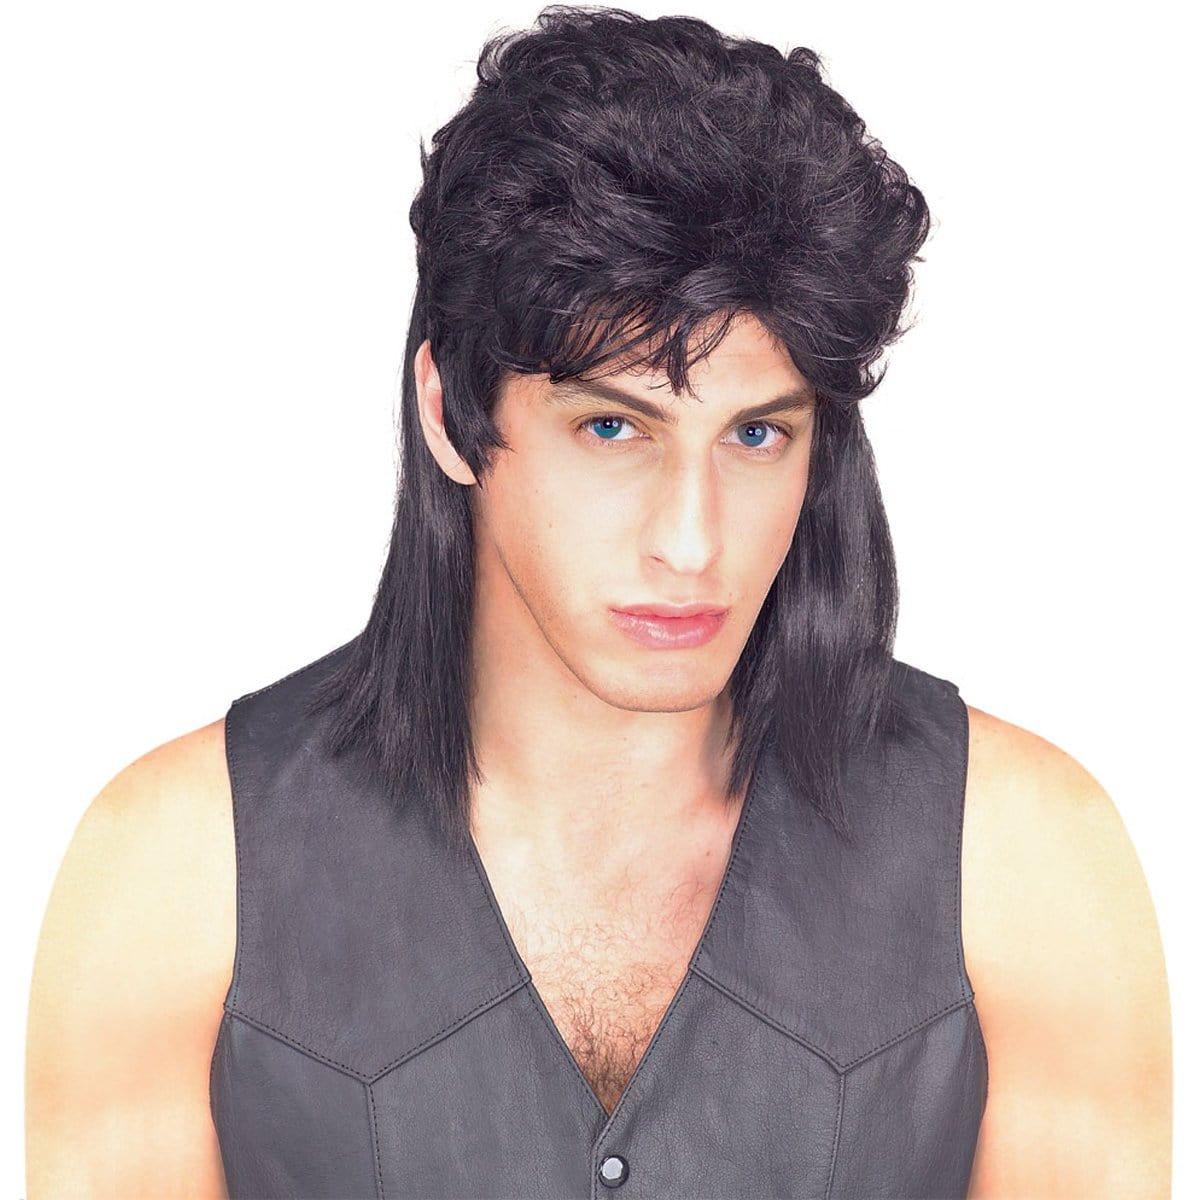 Buy Costume Accessories Black mullet wig for men sold at Party Expert